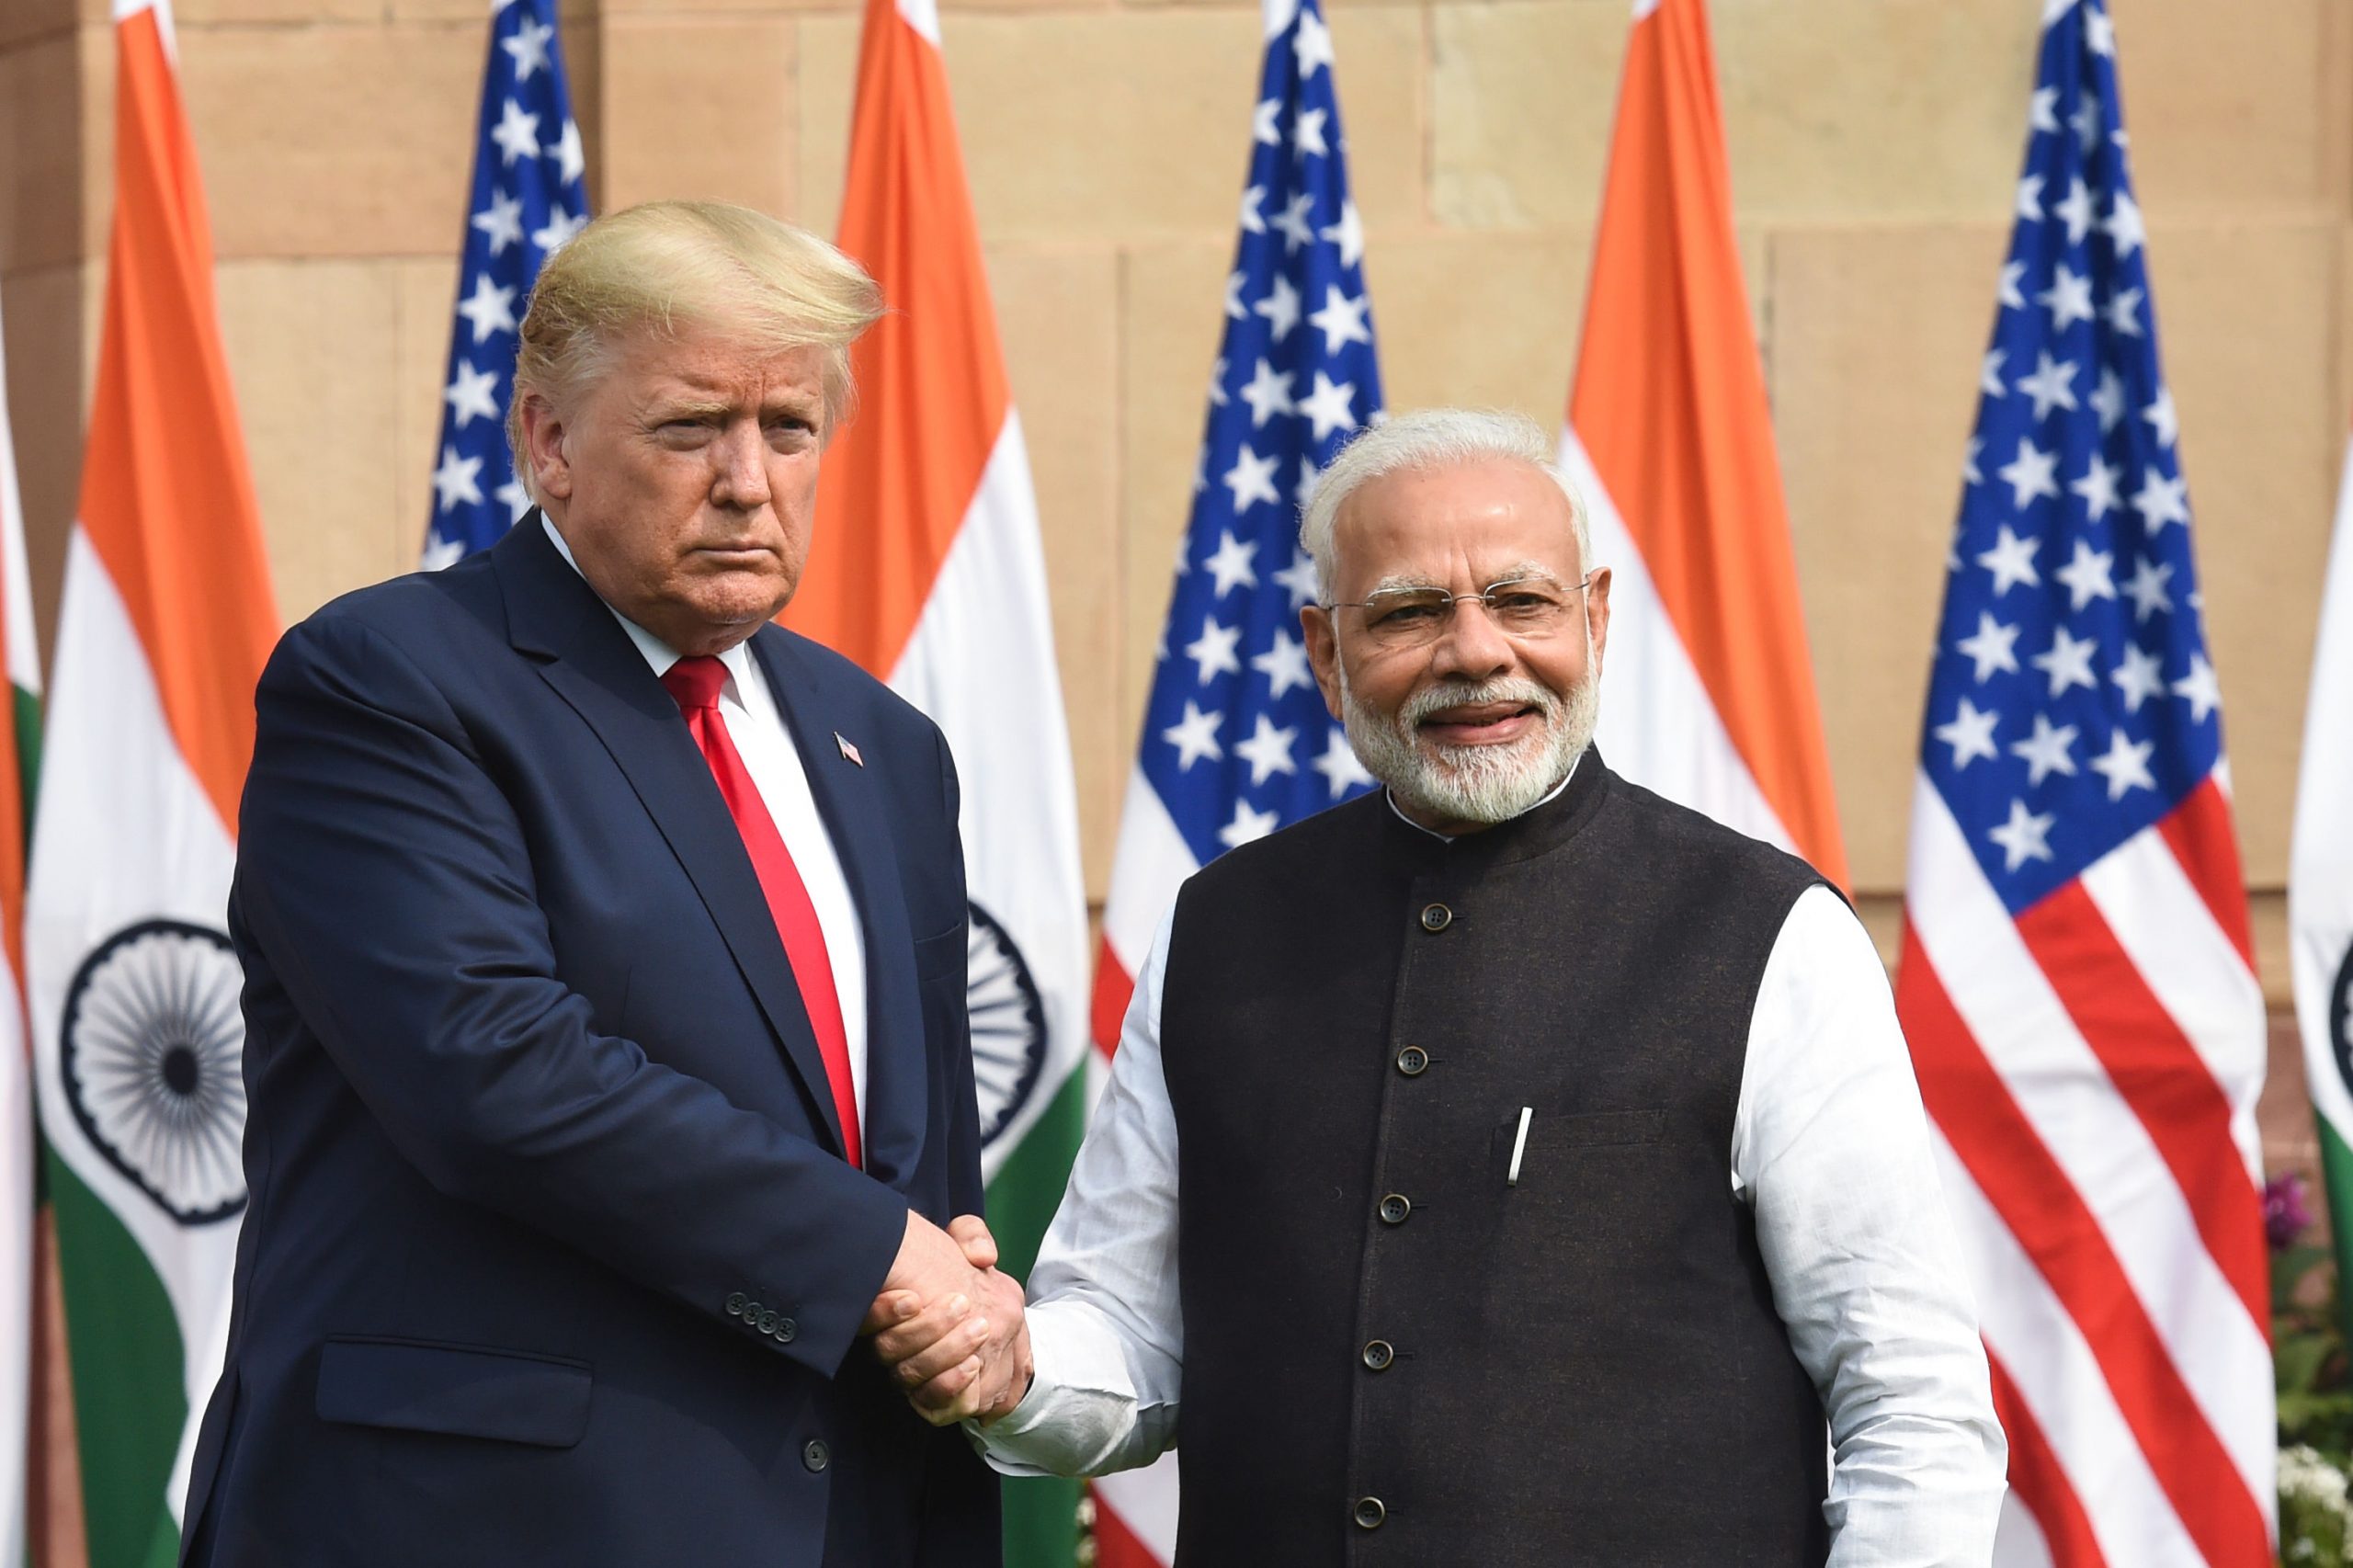 India-US ties suffer as they face trade frictions under Trump administration: Congress report